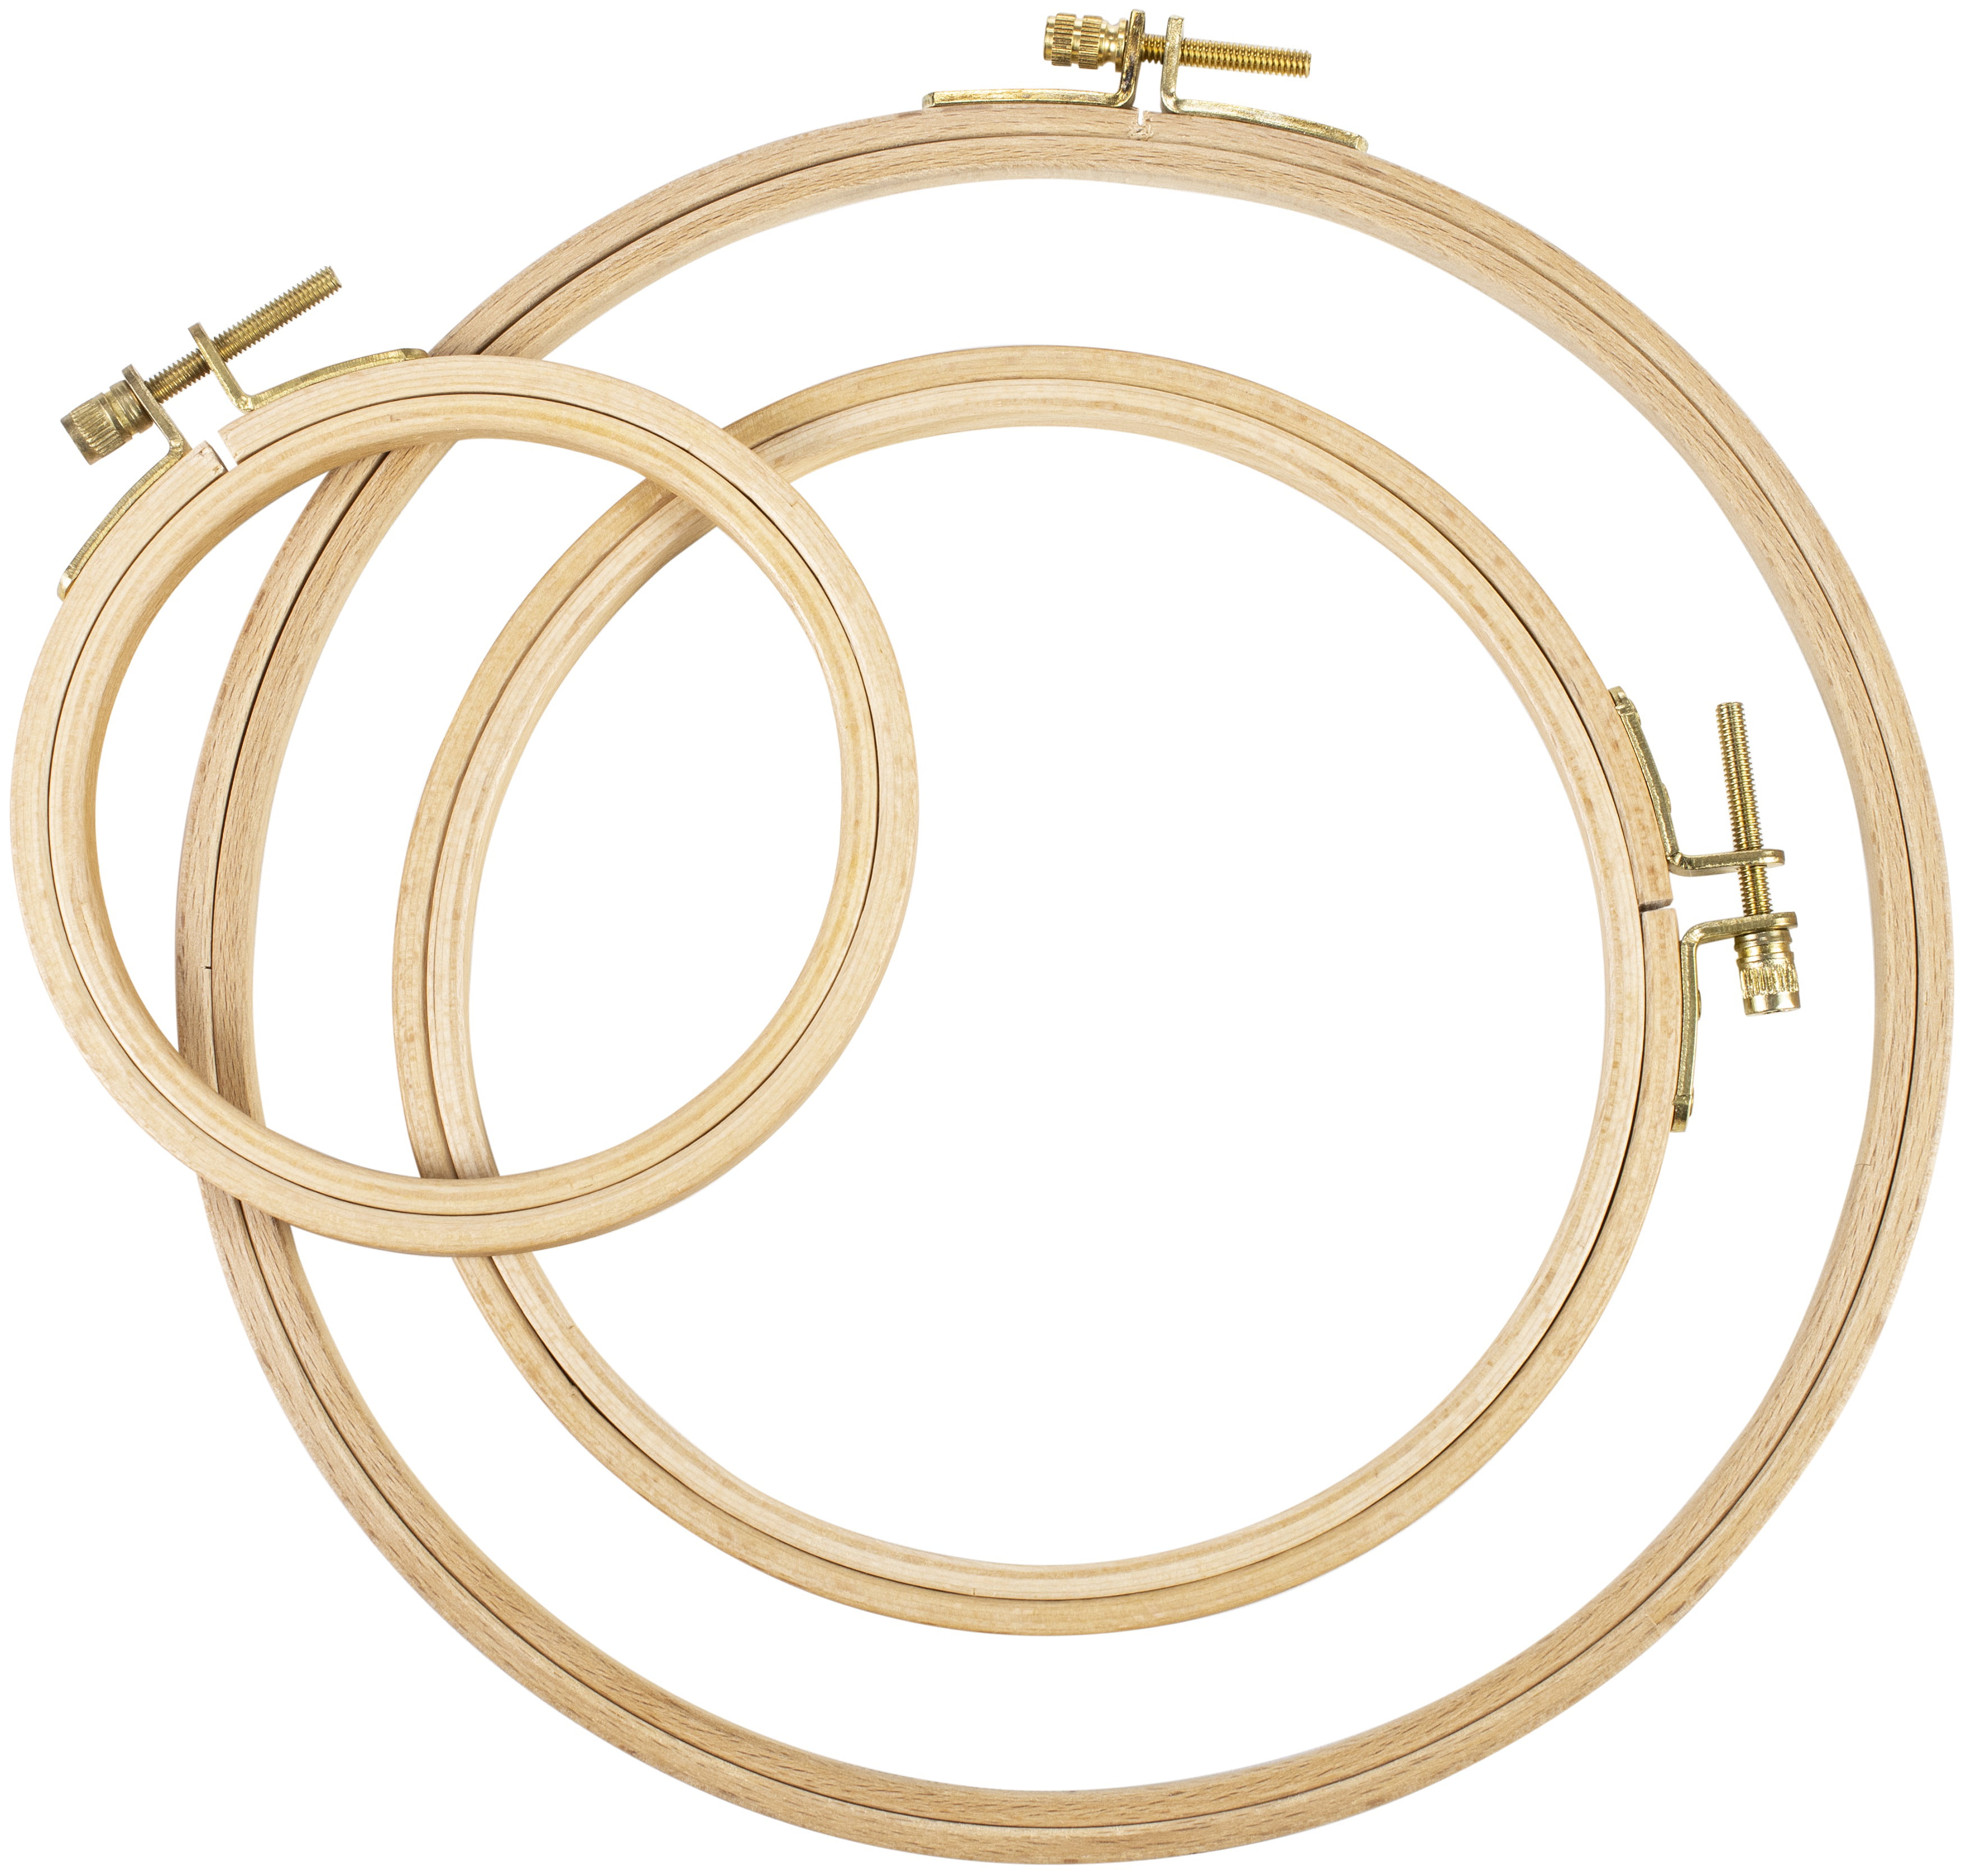 3 Pieces 10 Inch 26cm Embroidery Ring Cross No Slip Hoops Set Imitated Wood  Display Frame Circle Em